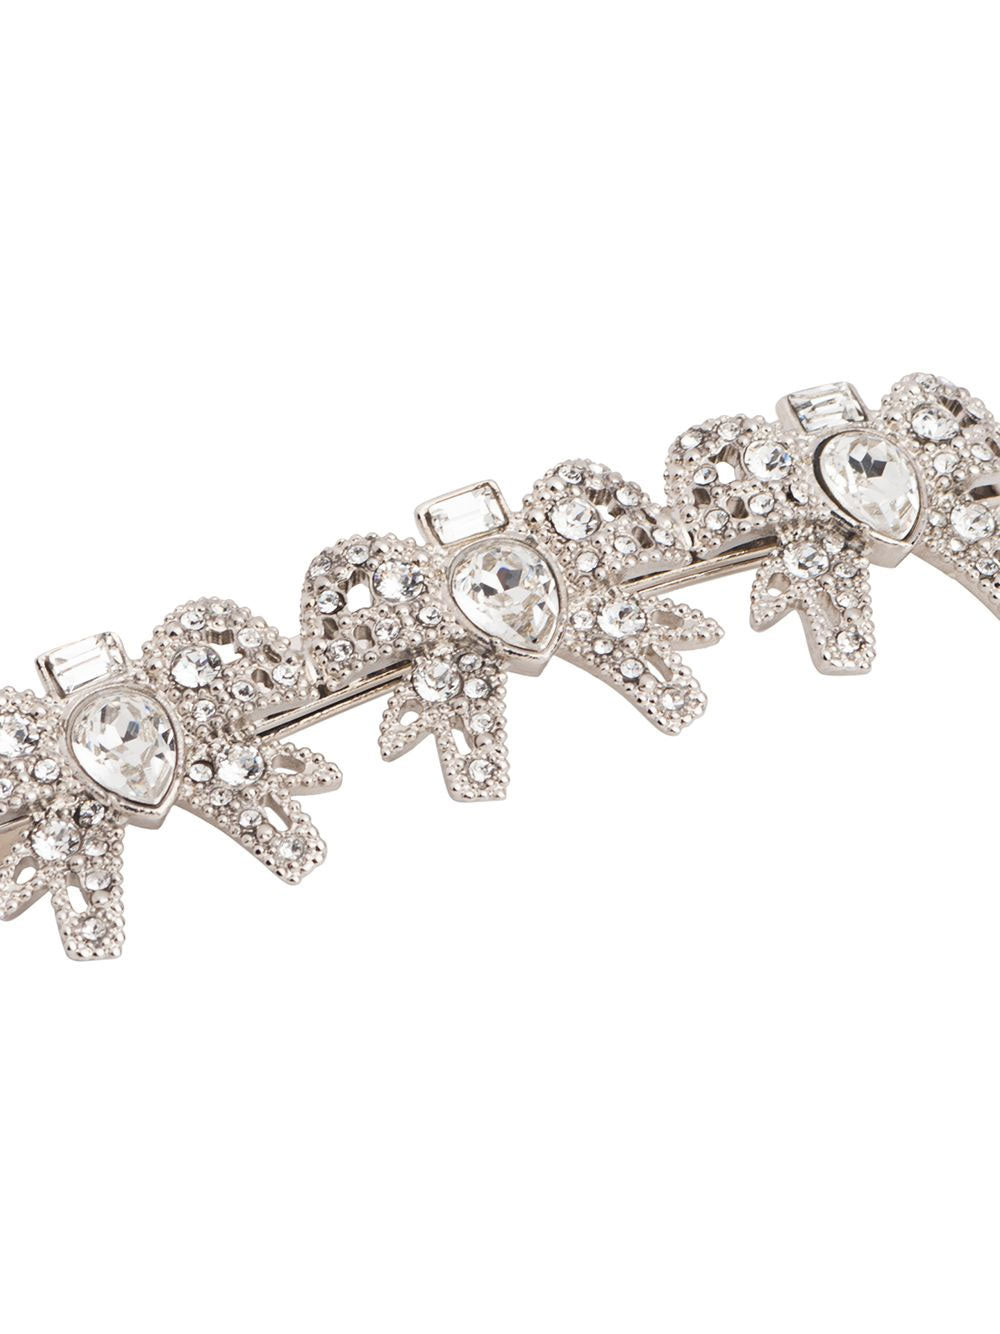 Hair clip with crystals